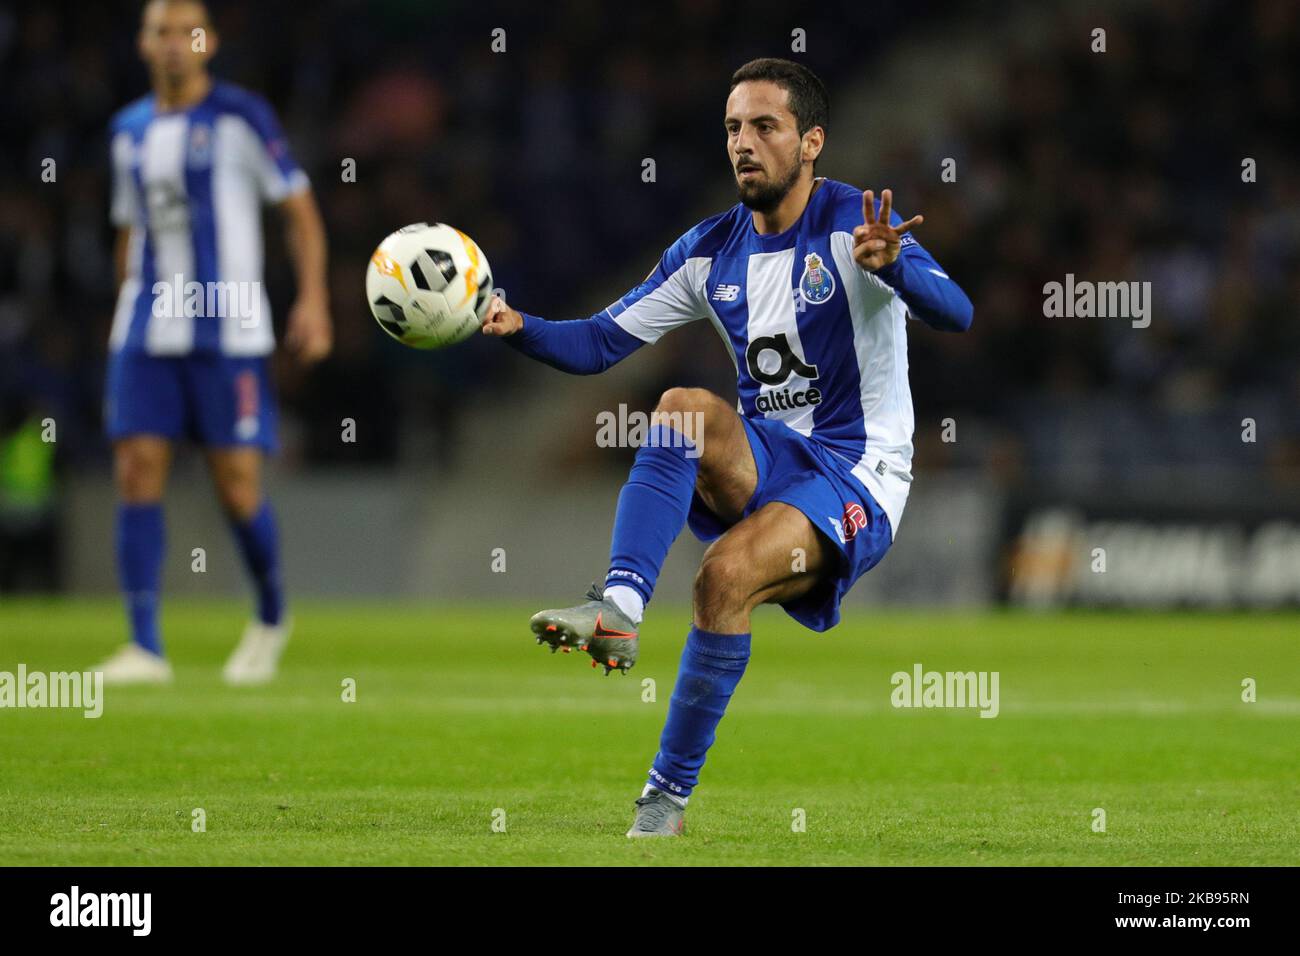 Porto's Portuguese midfielder Bruno Costa in action during the UEFA Europa League group G match between FC Porto and Rangers FC, at Dragao Stadium on October 24, 2019 in Porto, Portugal. (Photo by Paulo Oliveira / DPI / NurPhoto) Stock Photo